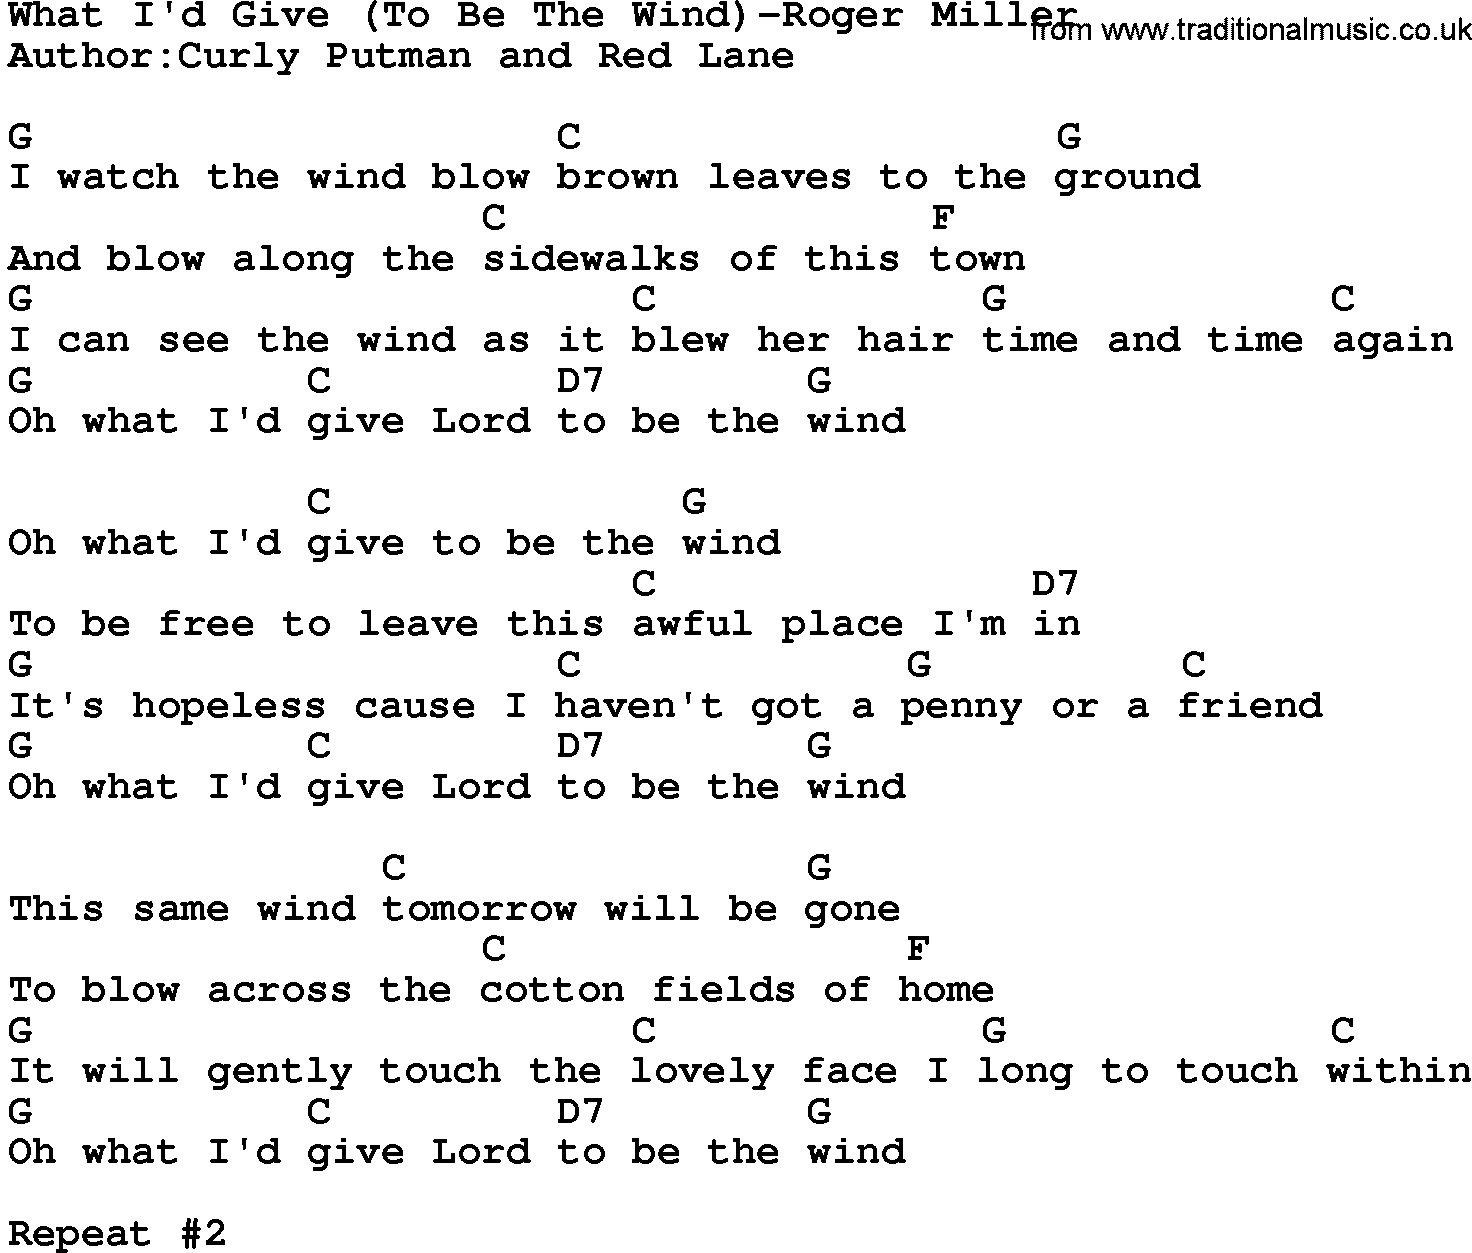 Country music song: What I'd Give(To Be The Wind)-Roger Miller lyrics and chords